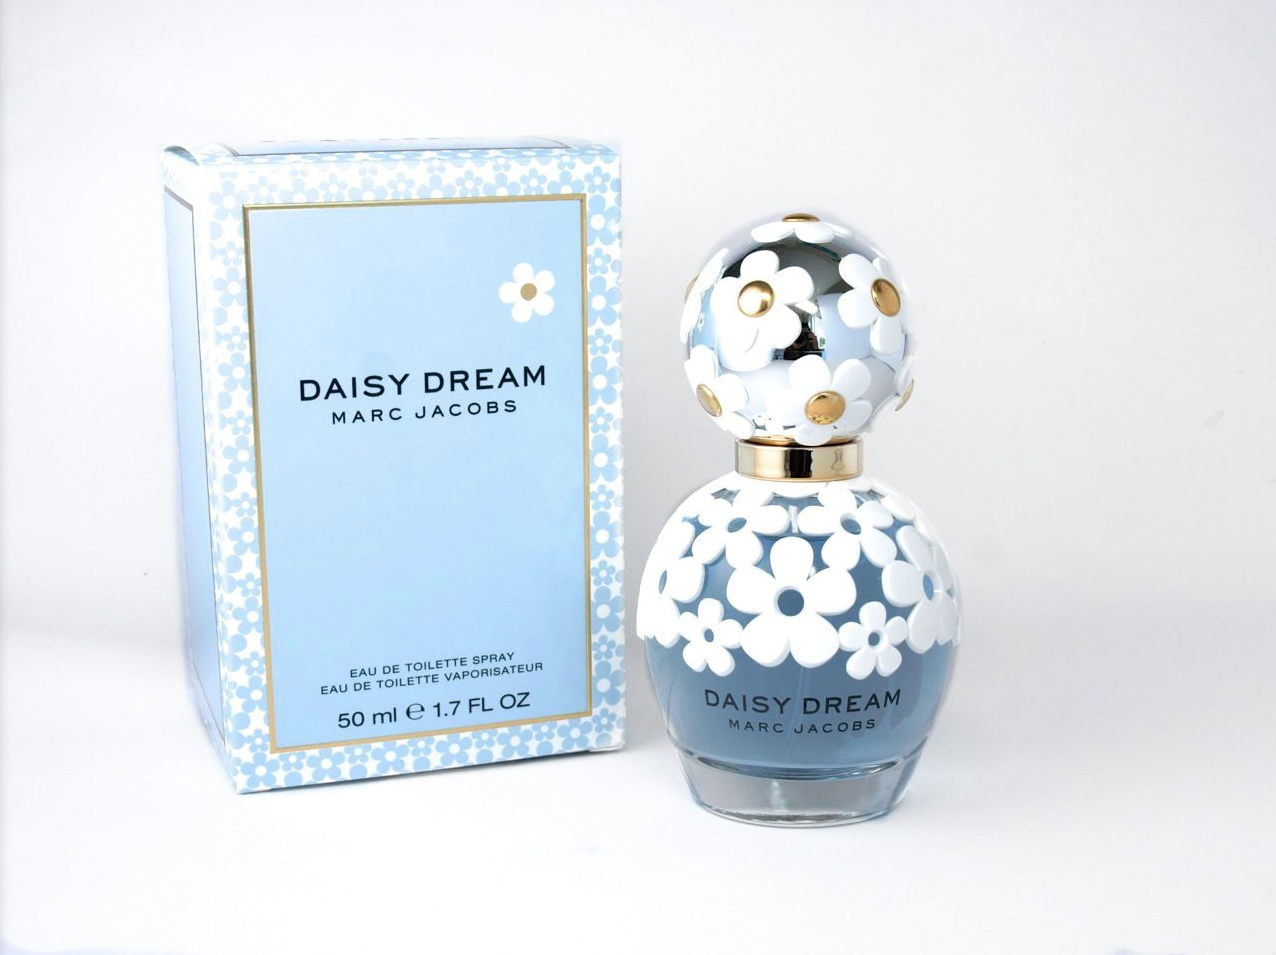 Marc Jacobs Daisy Dream Eau de Toilette: | The Happy Sloths: Beauty, Makeup, and Skincare Blog with Reviews and Swatches